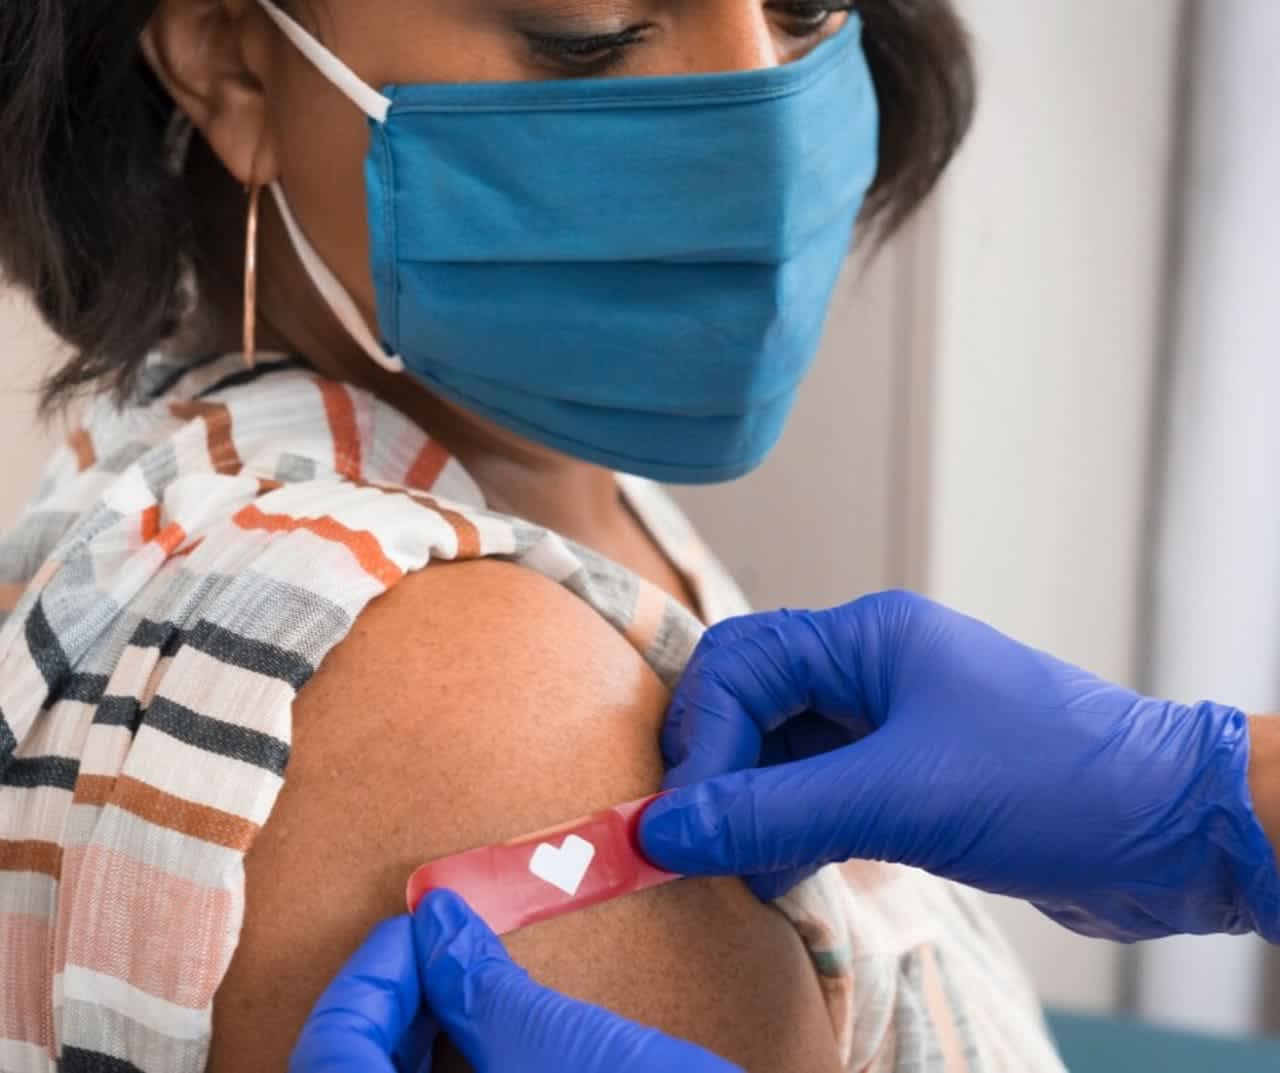 CVS pharmacies in Connecticut are now vaccinating children between the ages of 12 and 15.